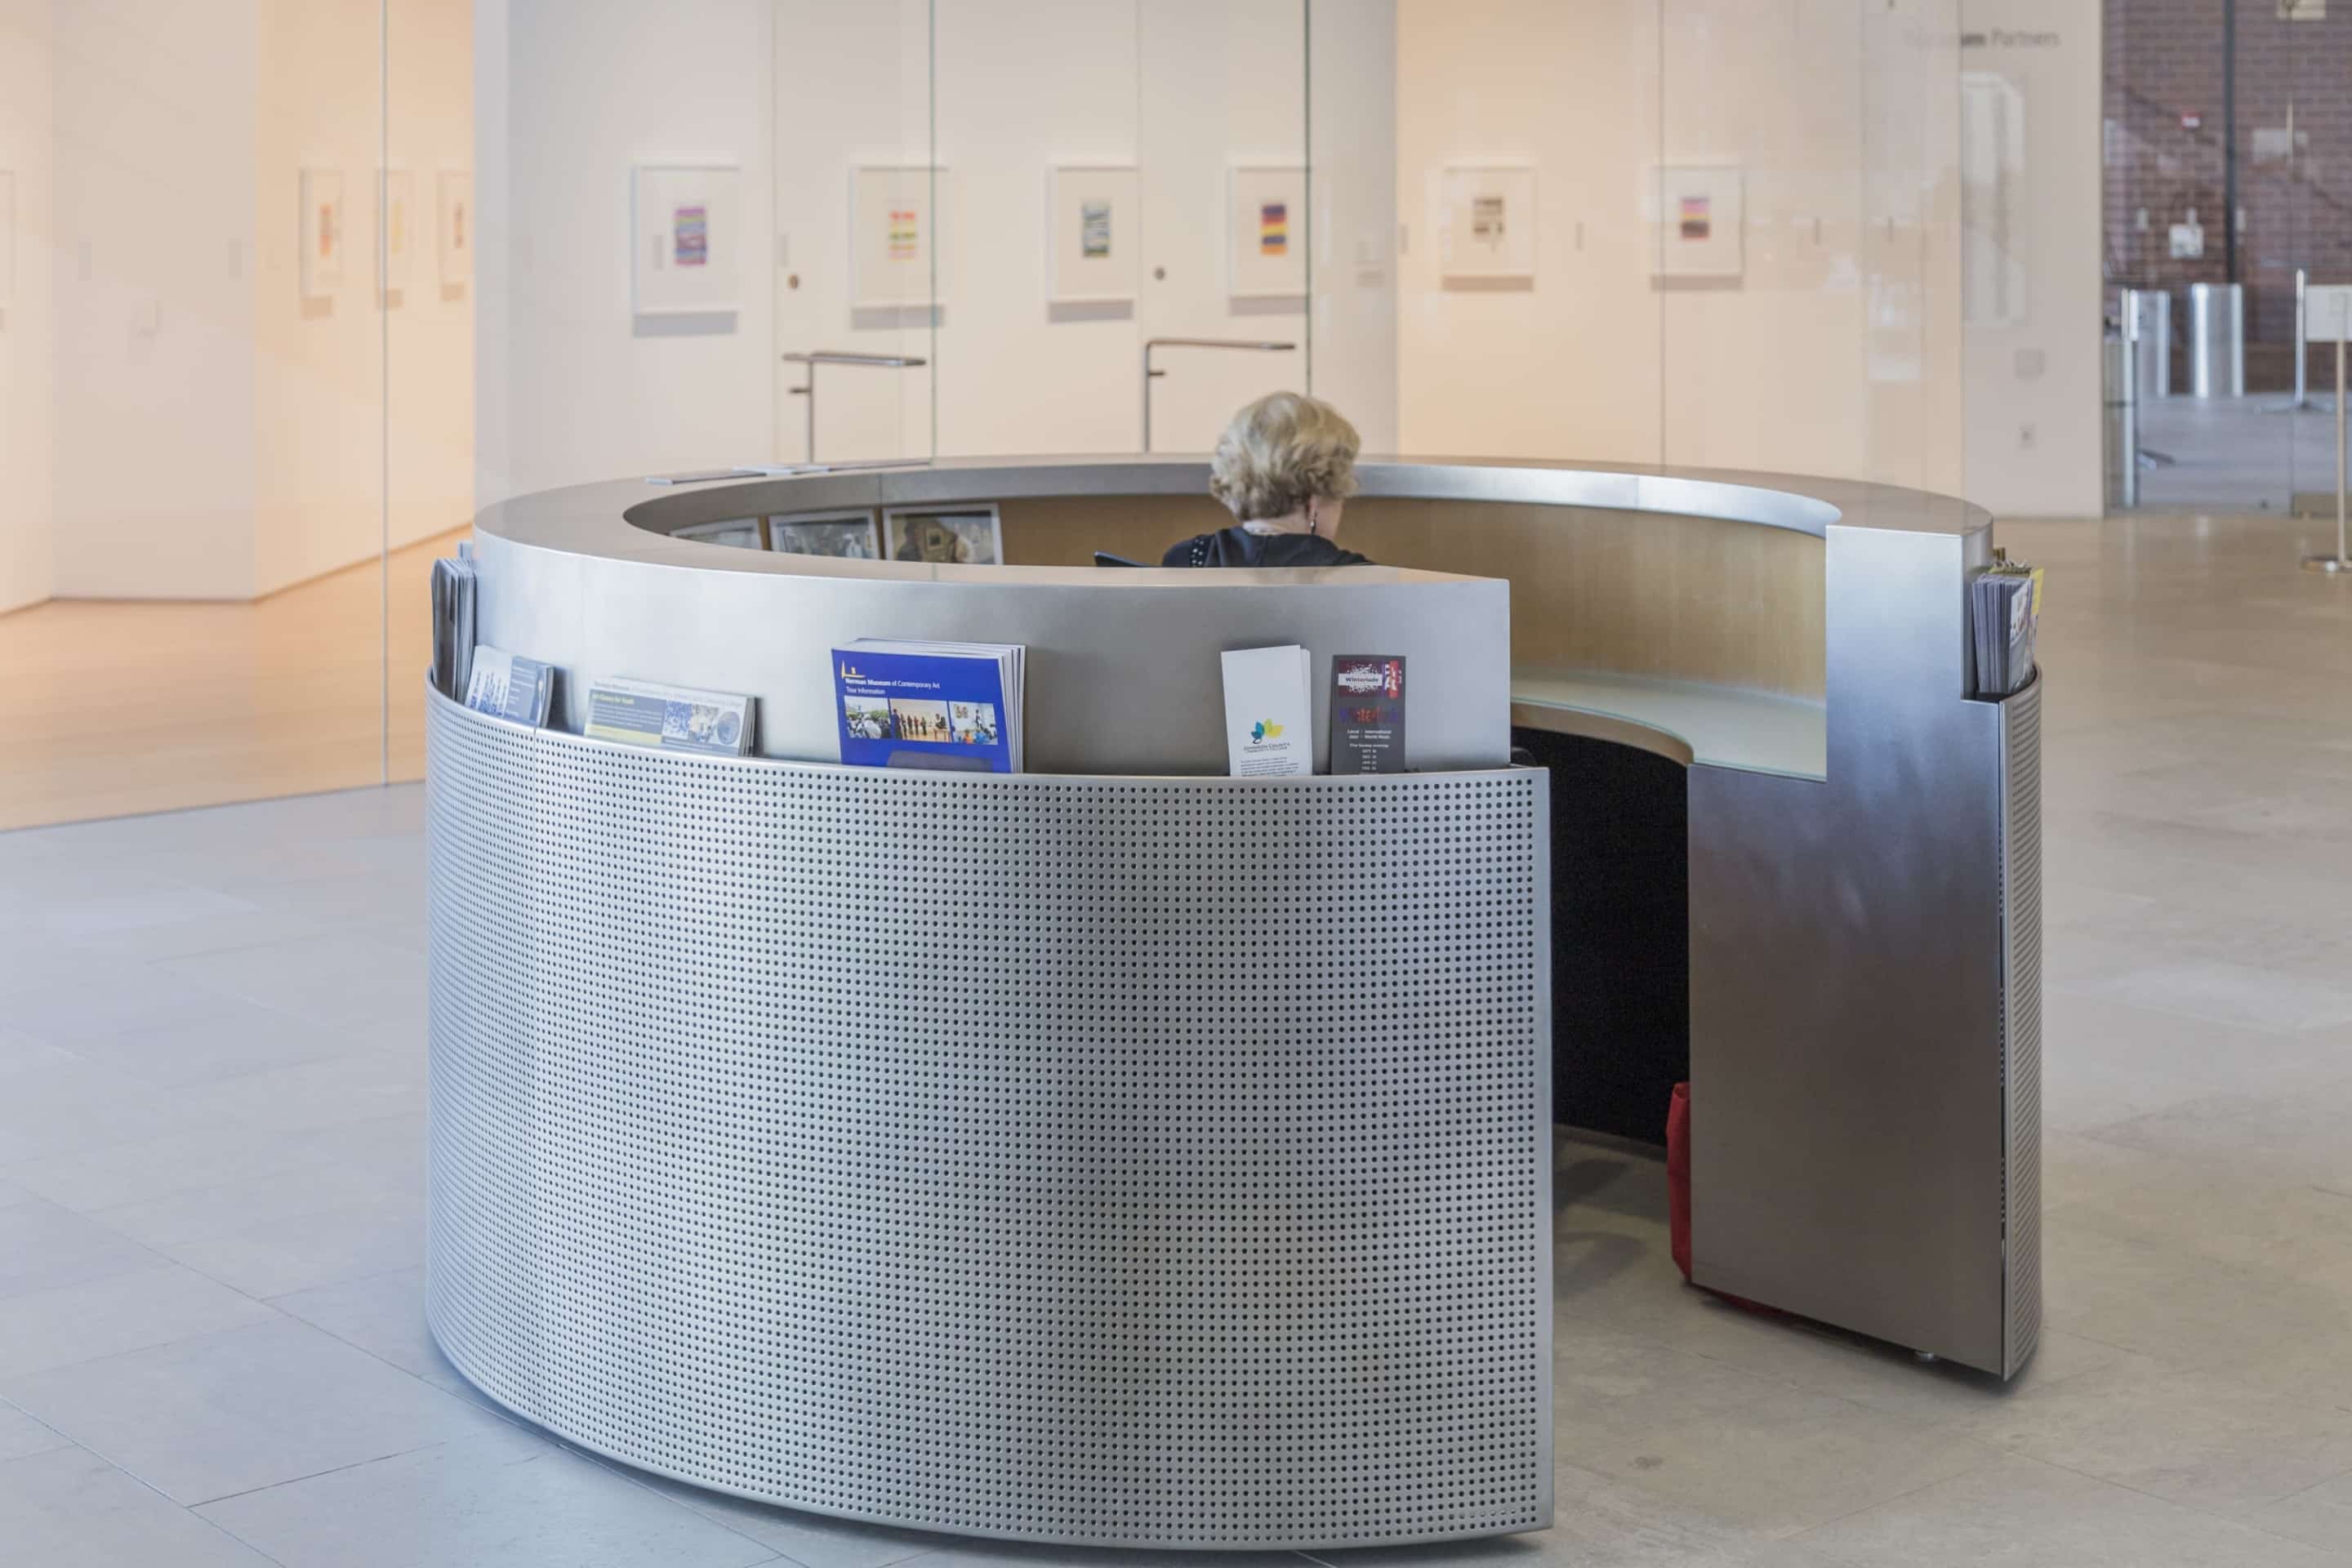 Custom stainless steel reception desk for the Nerman Museum of Contemporary Art